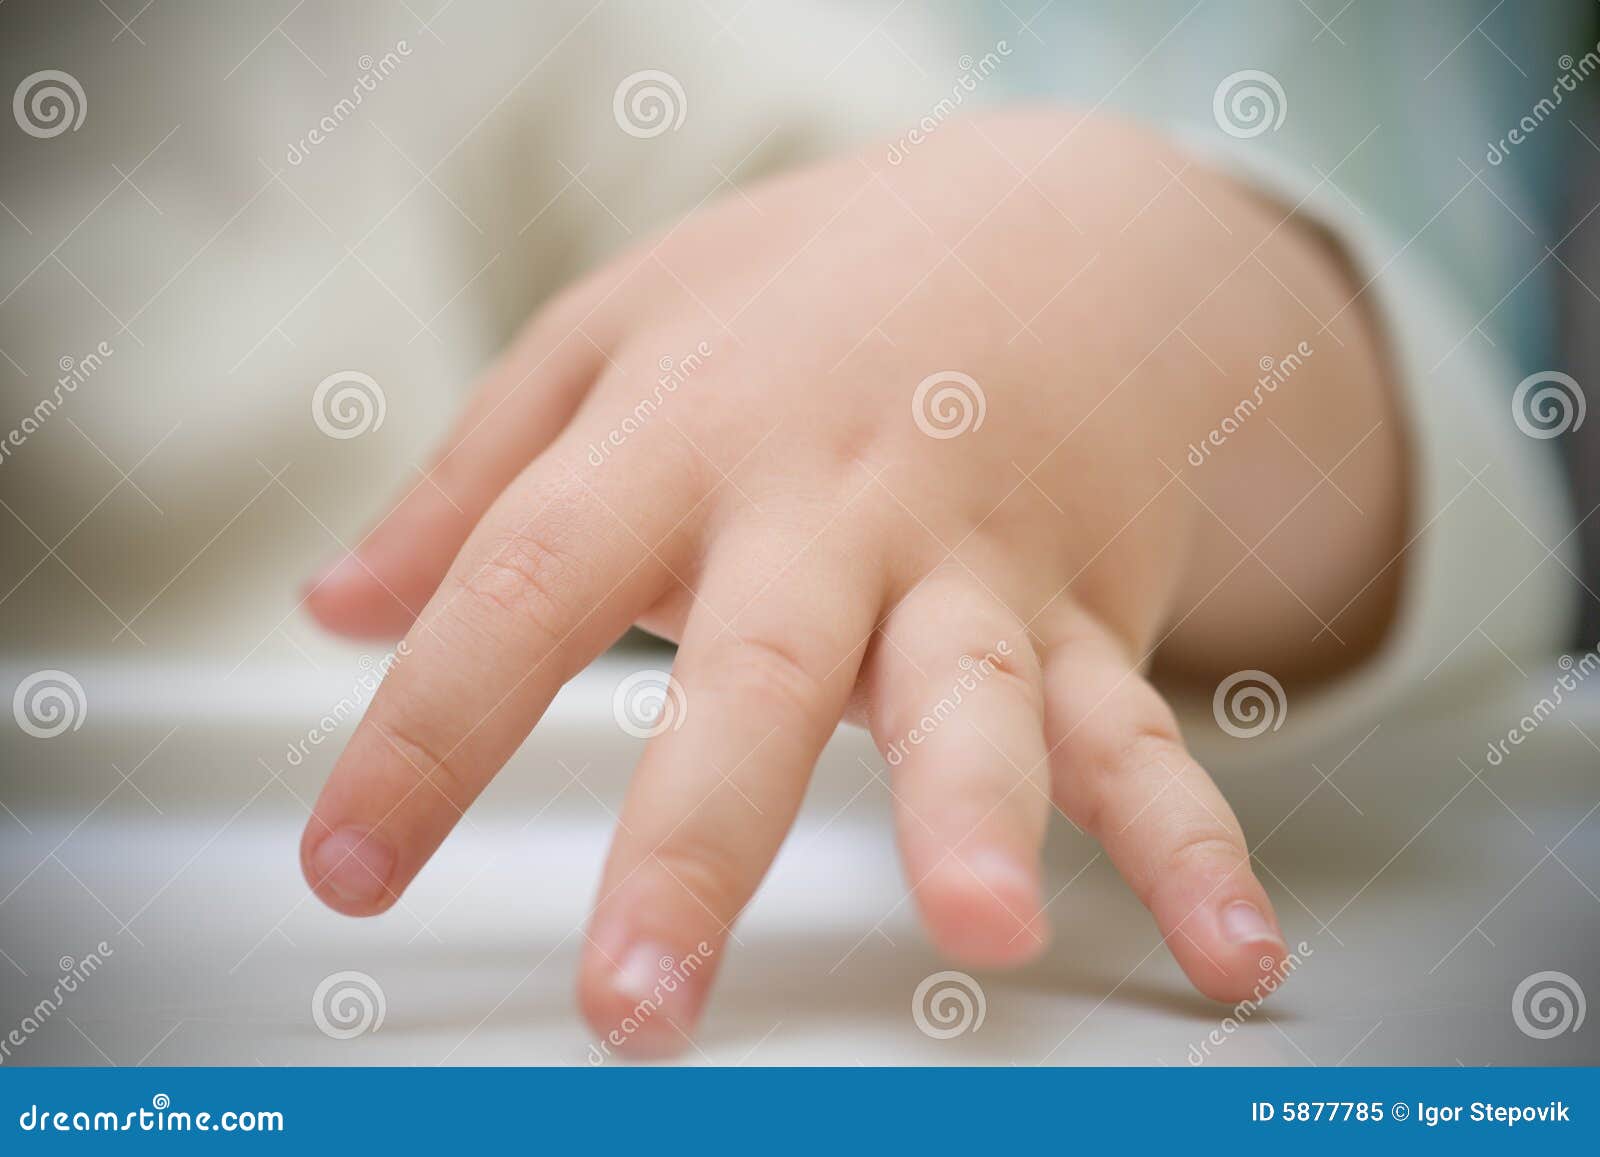 At The Fingertips Stock Image Image Of Hand Child Skin 5